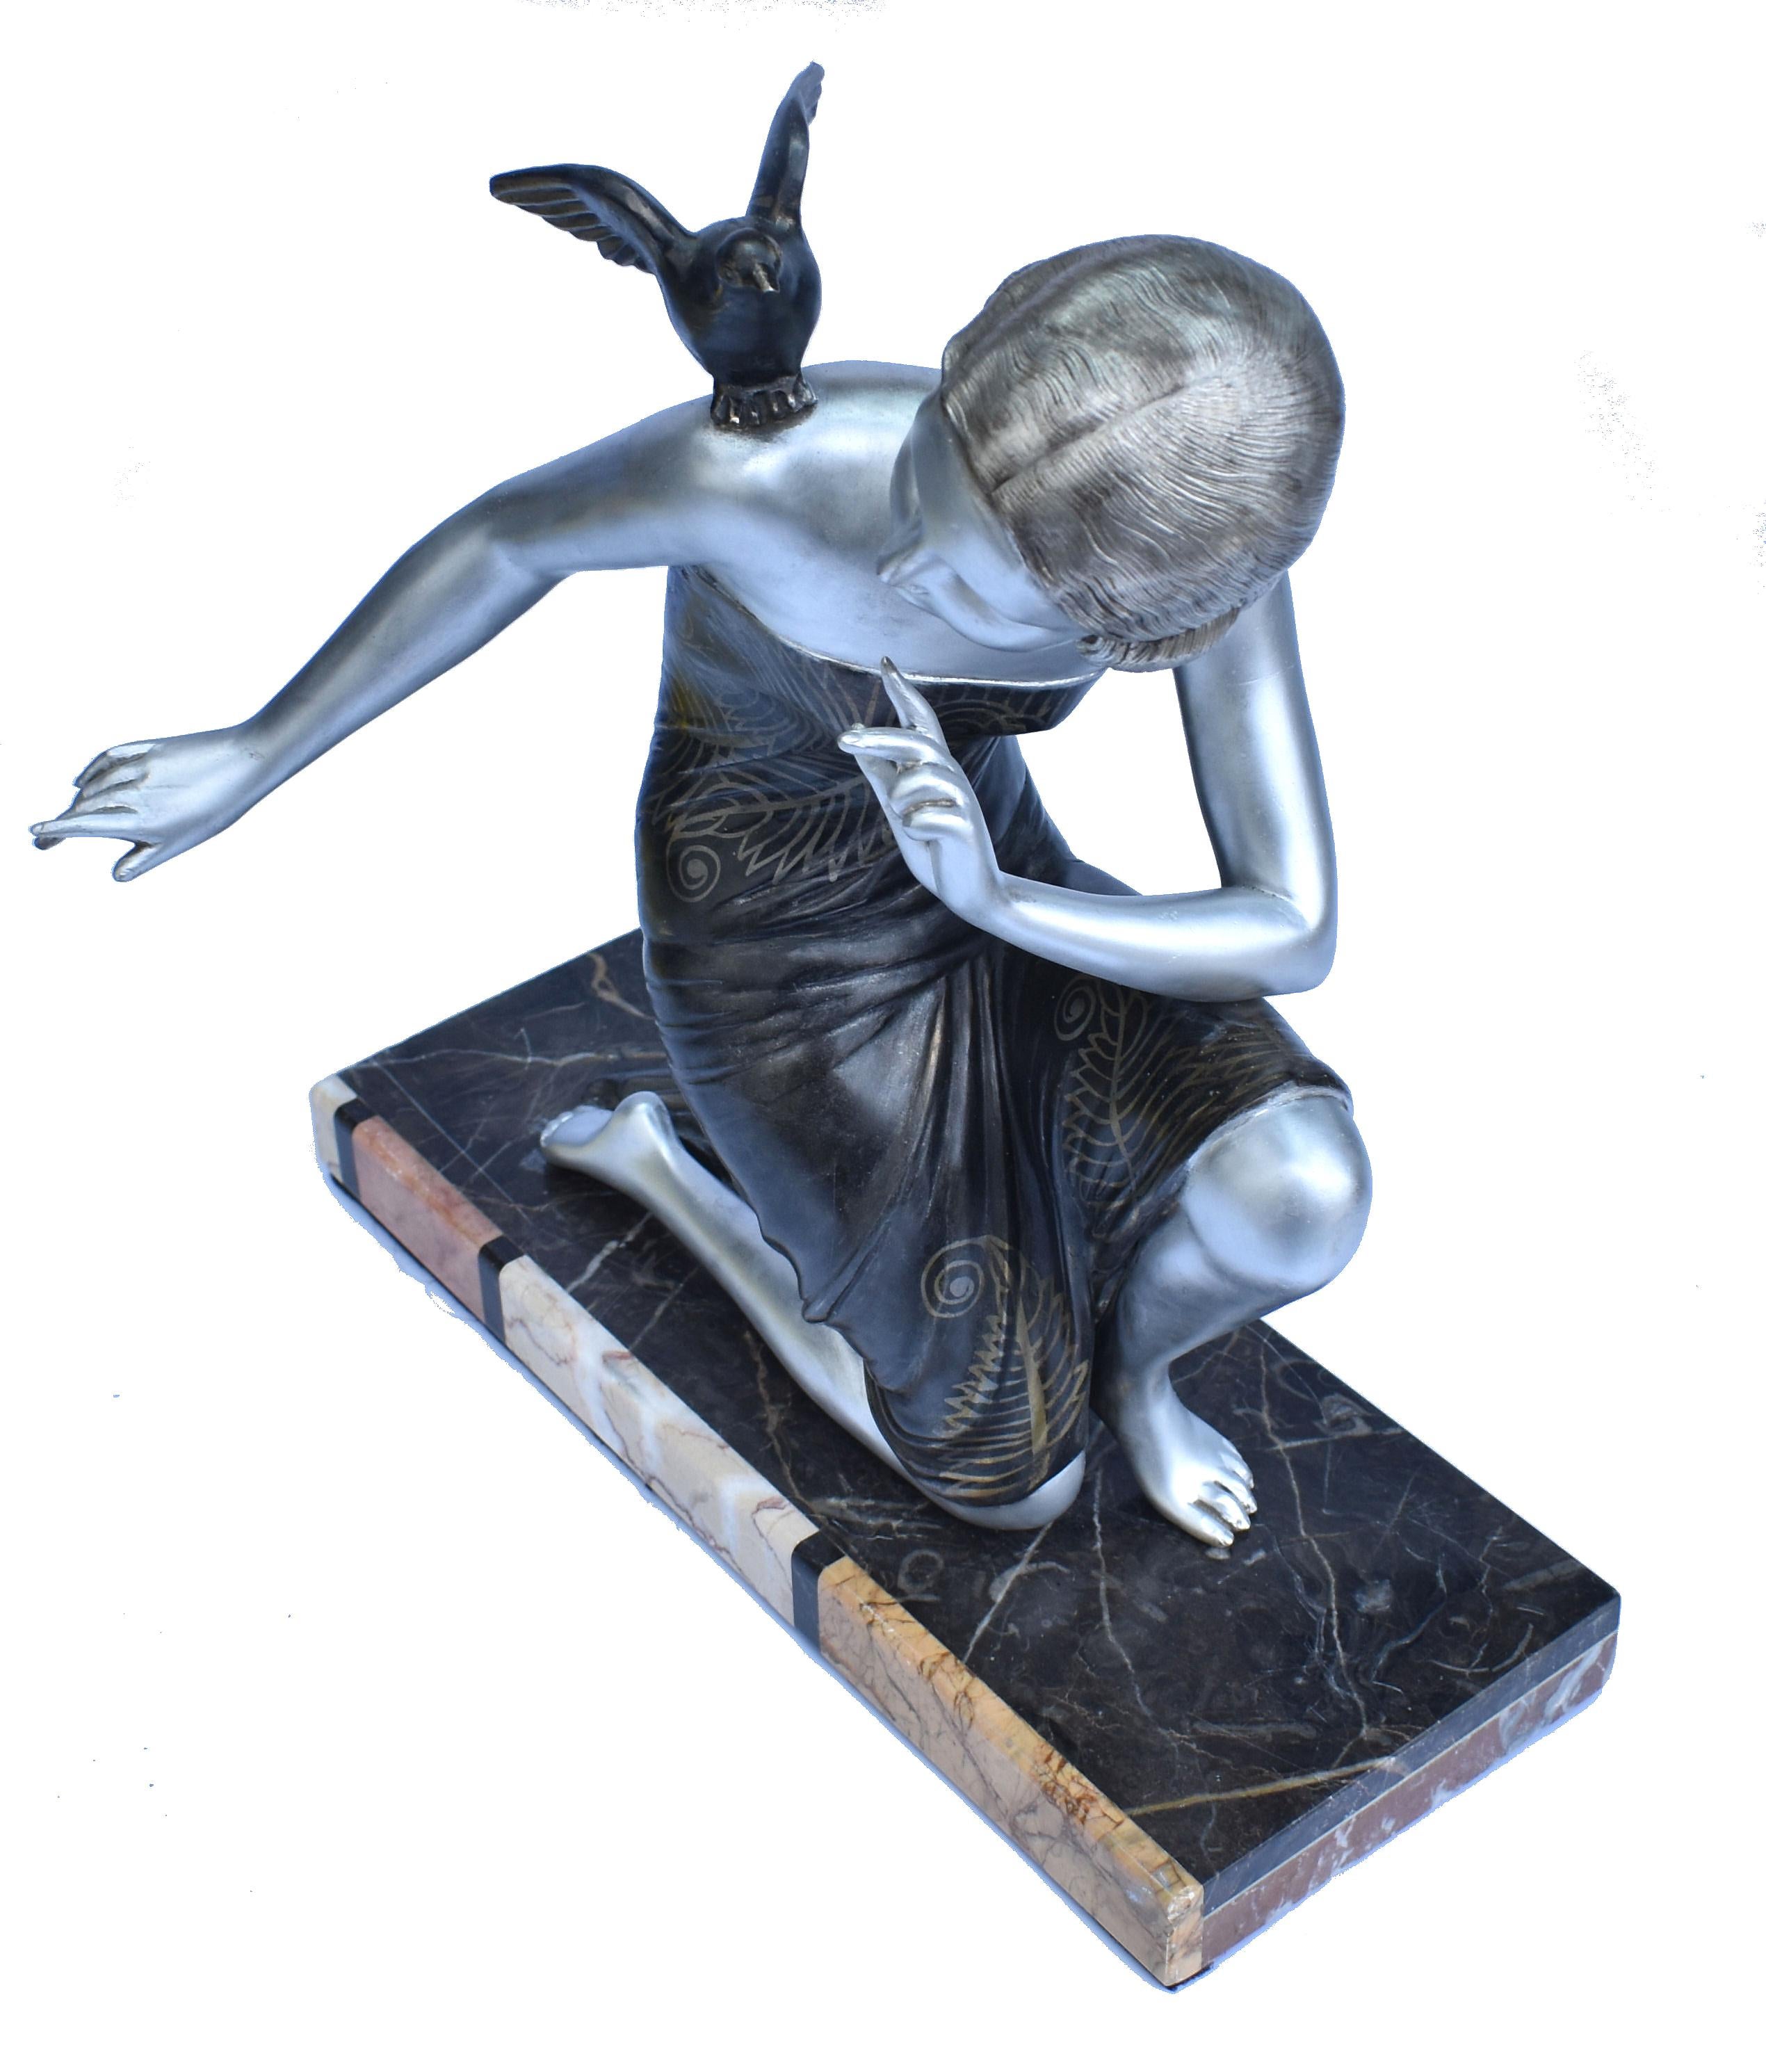 European Very Large Art Deco Signed Figure by URIANO, circa 1930